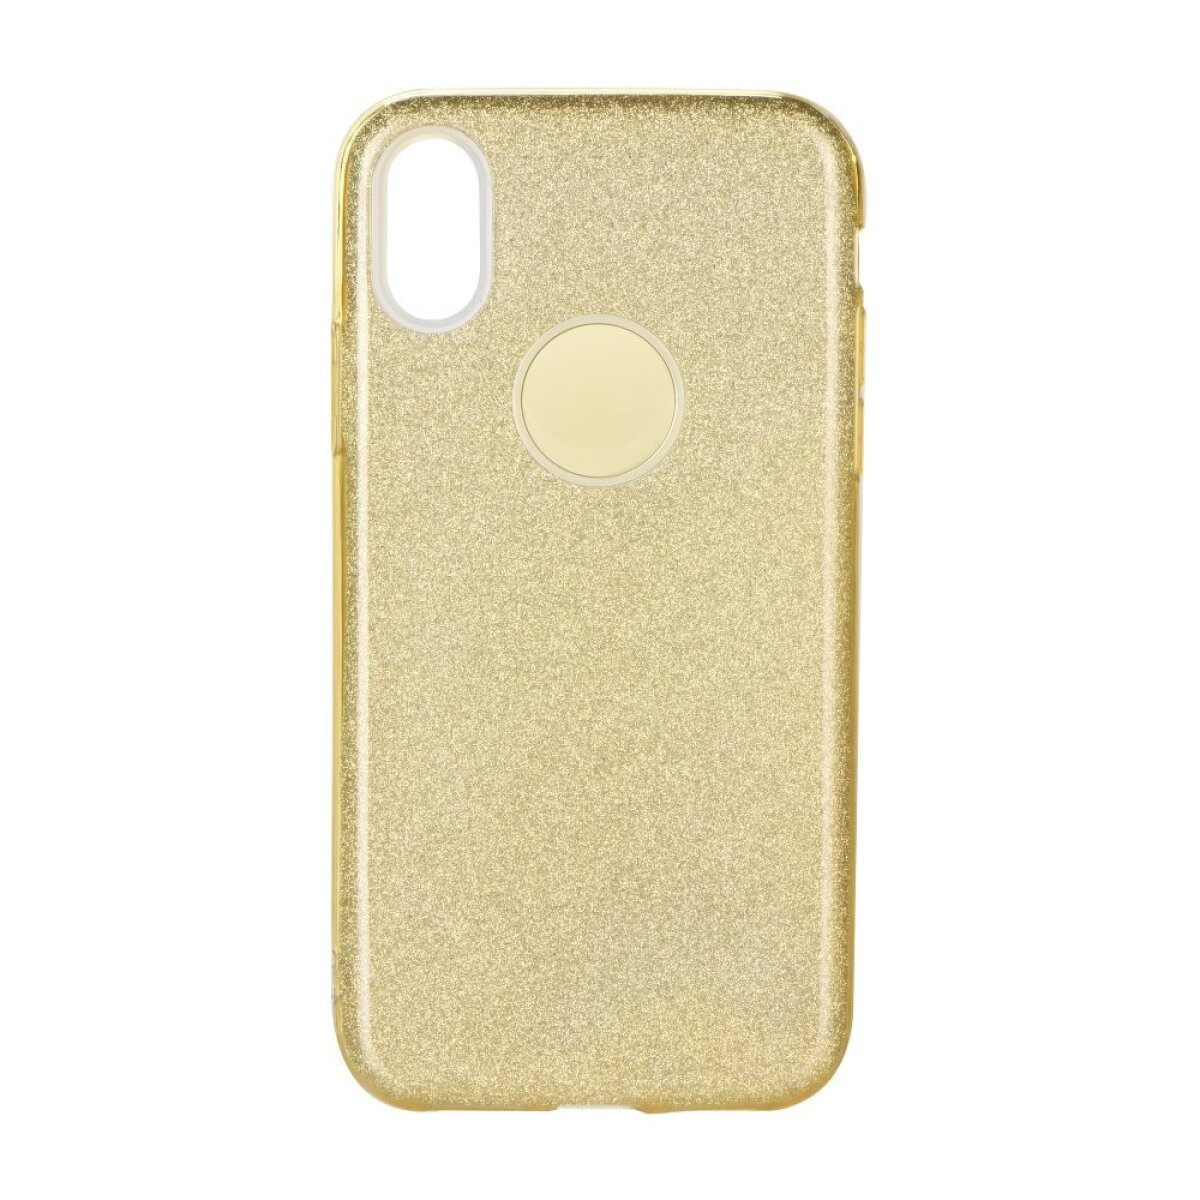 P40 SHINING FORCELL Lite, LITE gold, Huawei, Cover, P40 Huawei Gold Full